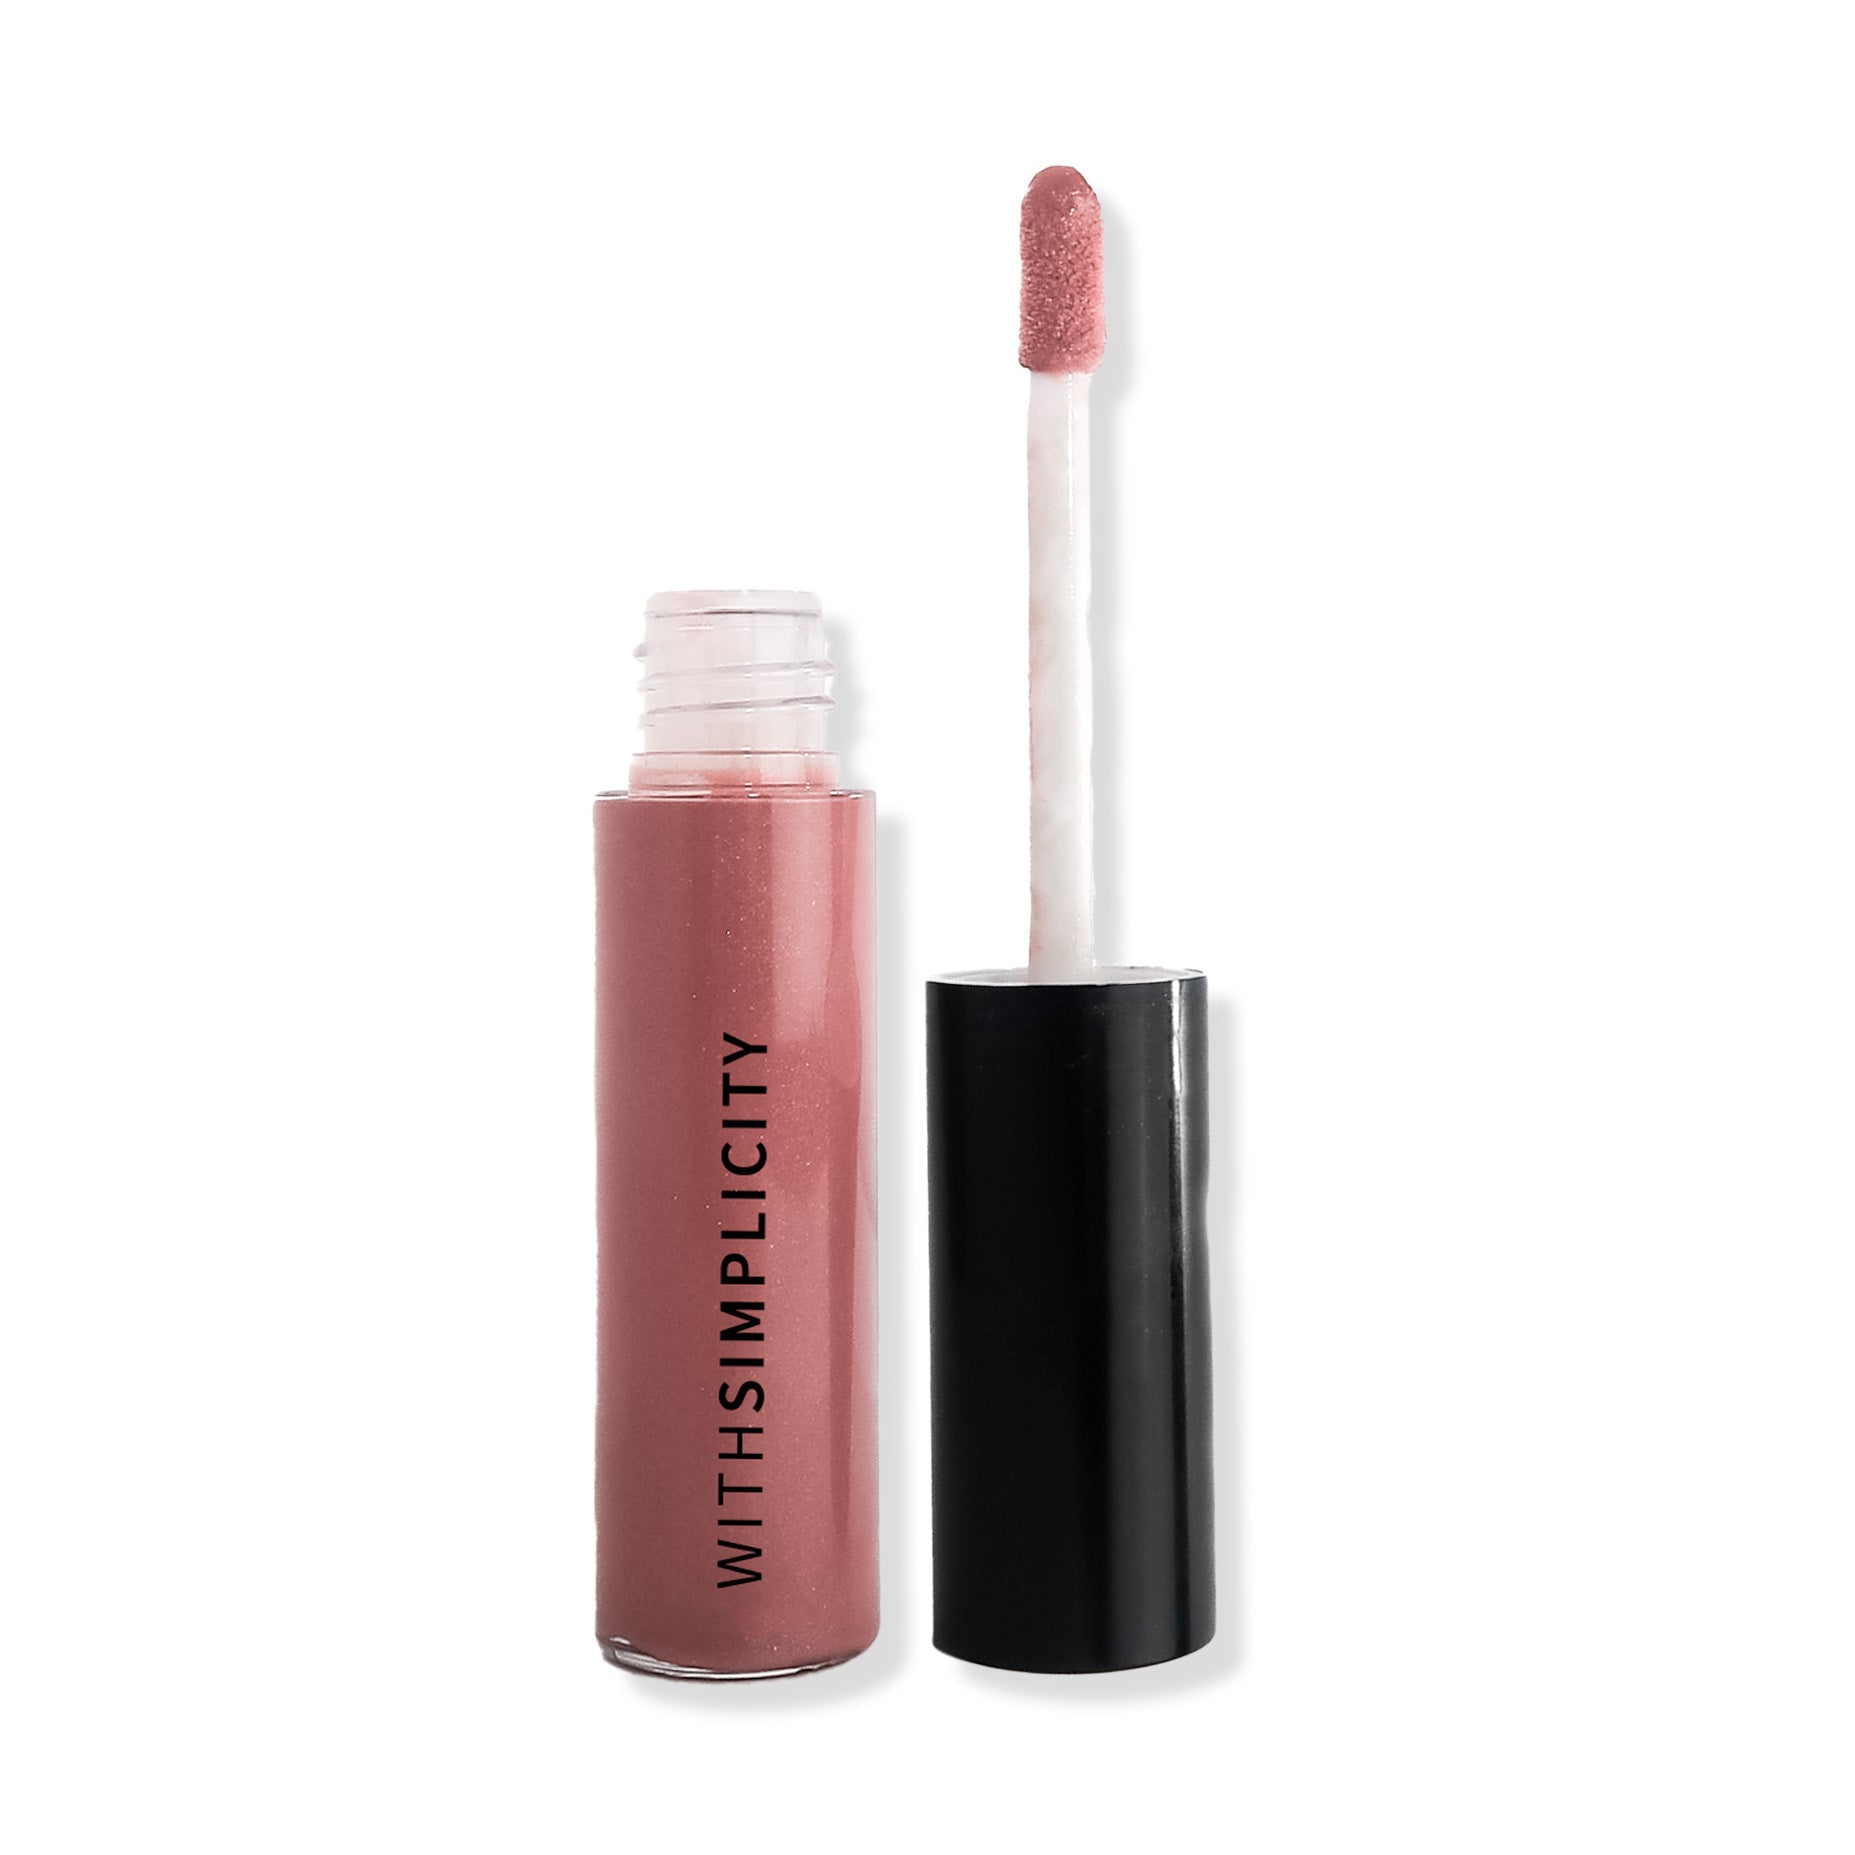 Le Lip Gloss - Coquette by withSimplicity